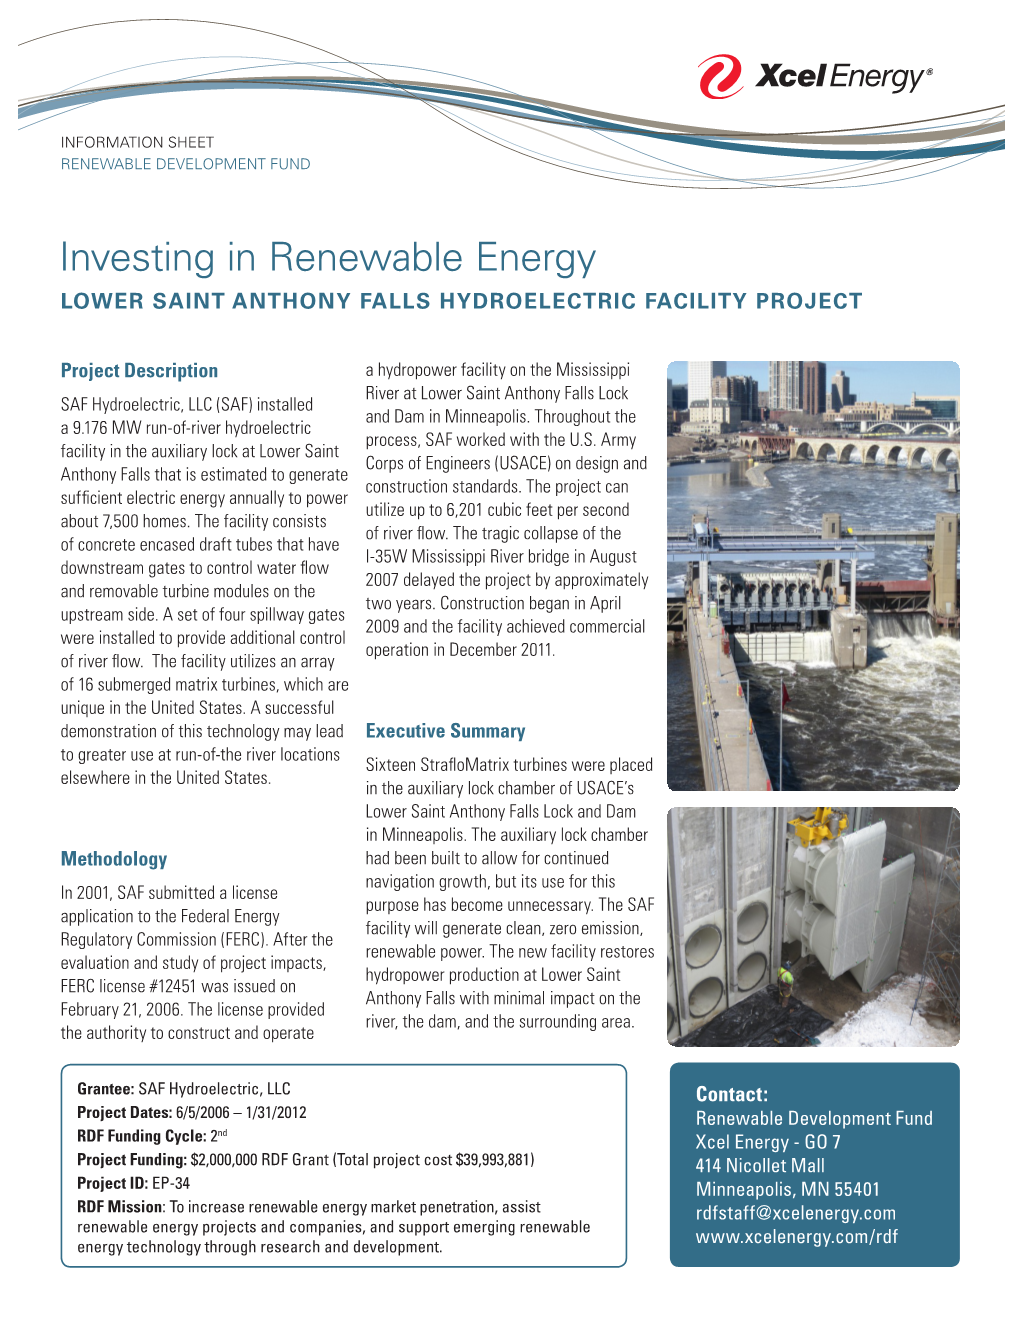 Investing in Renewable Energy LOWER SAINT ANTHONY FALLS HYDROELECTRIC FACILITY PROJECT